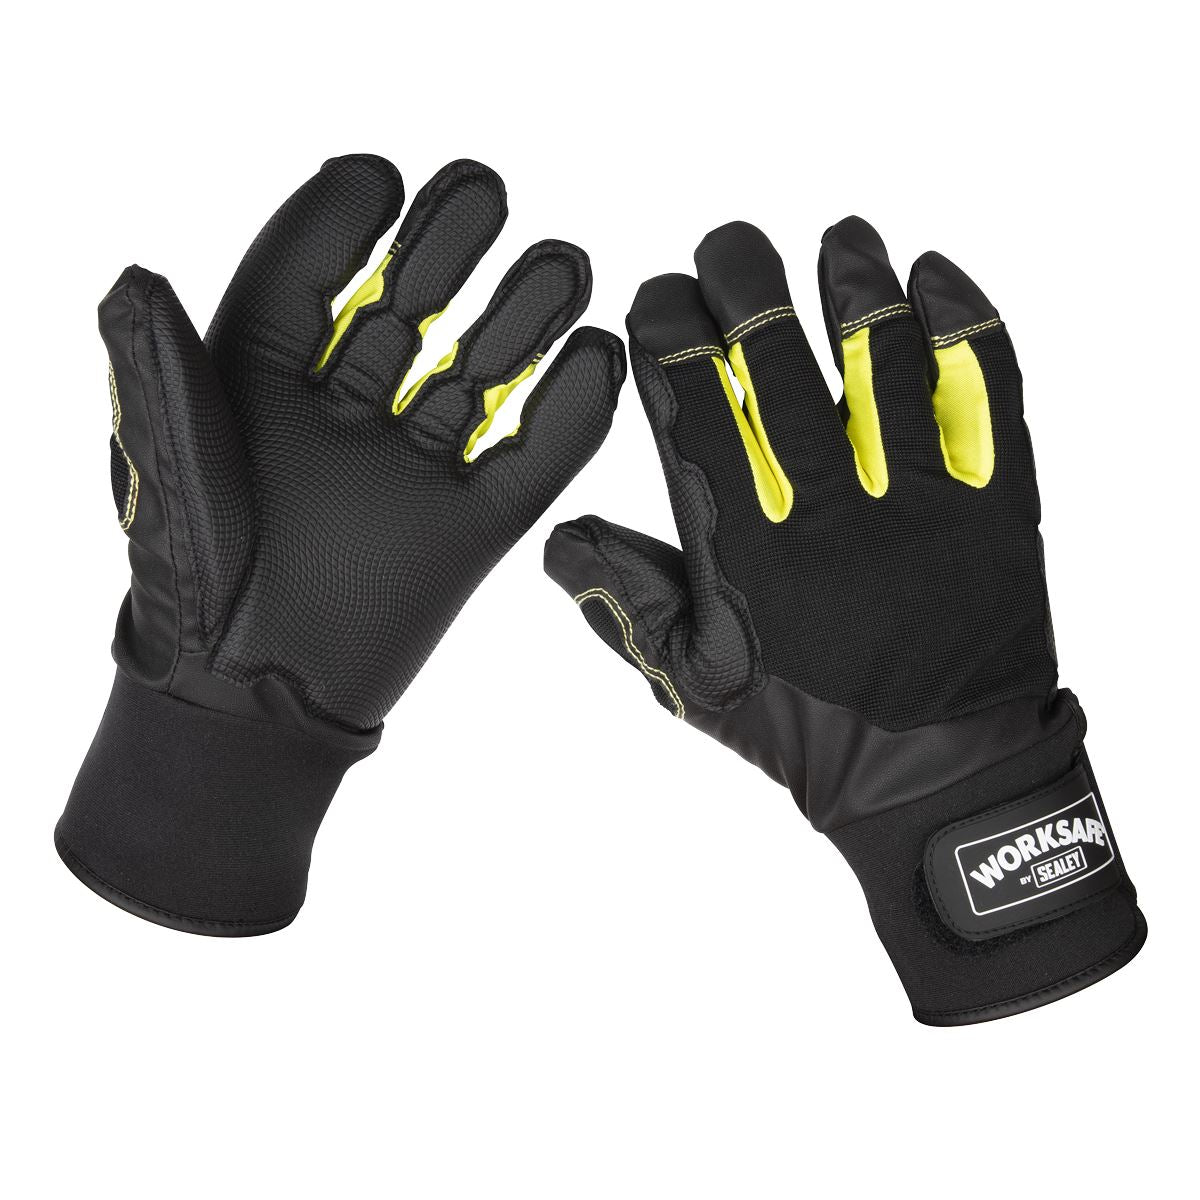 Worksafe by Sealey Anti-Vibration Gloves X-Large - Pair